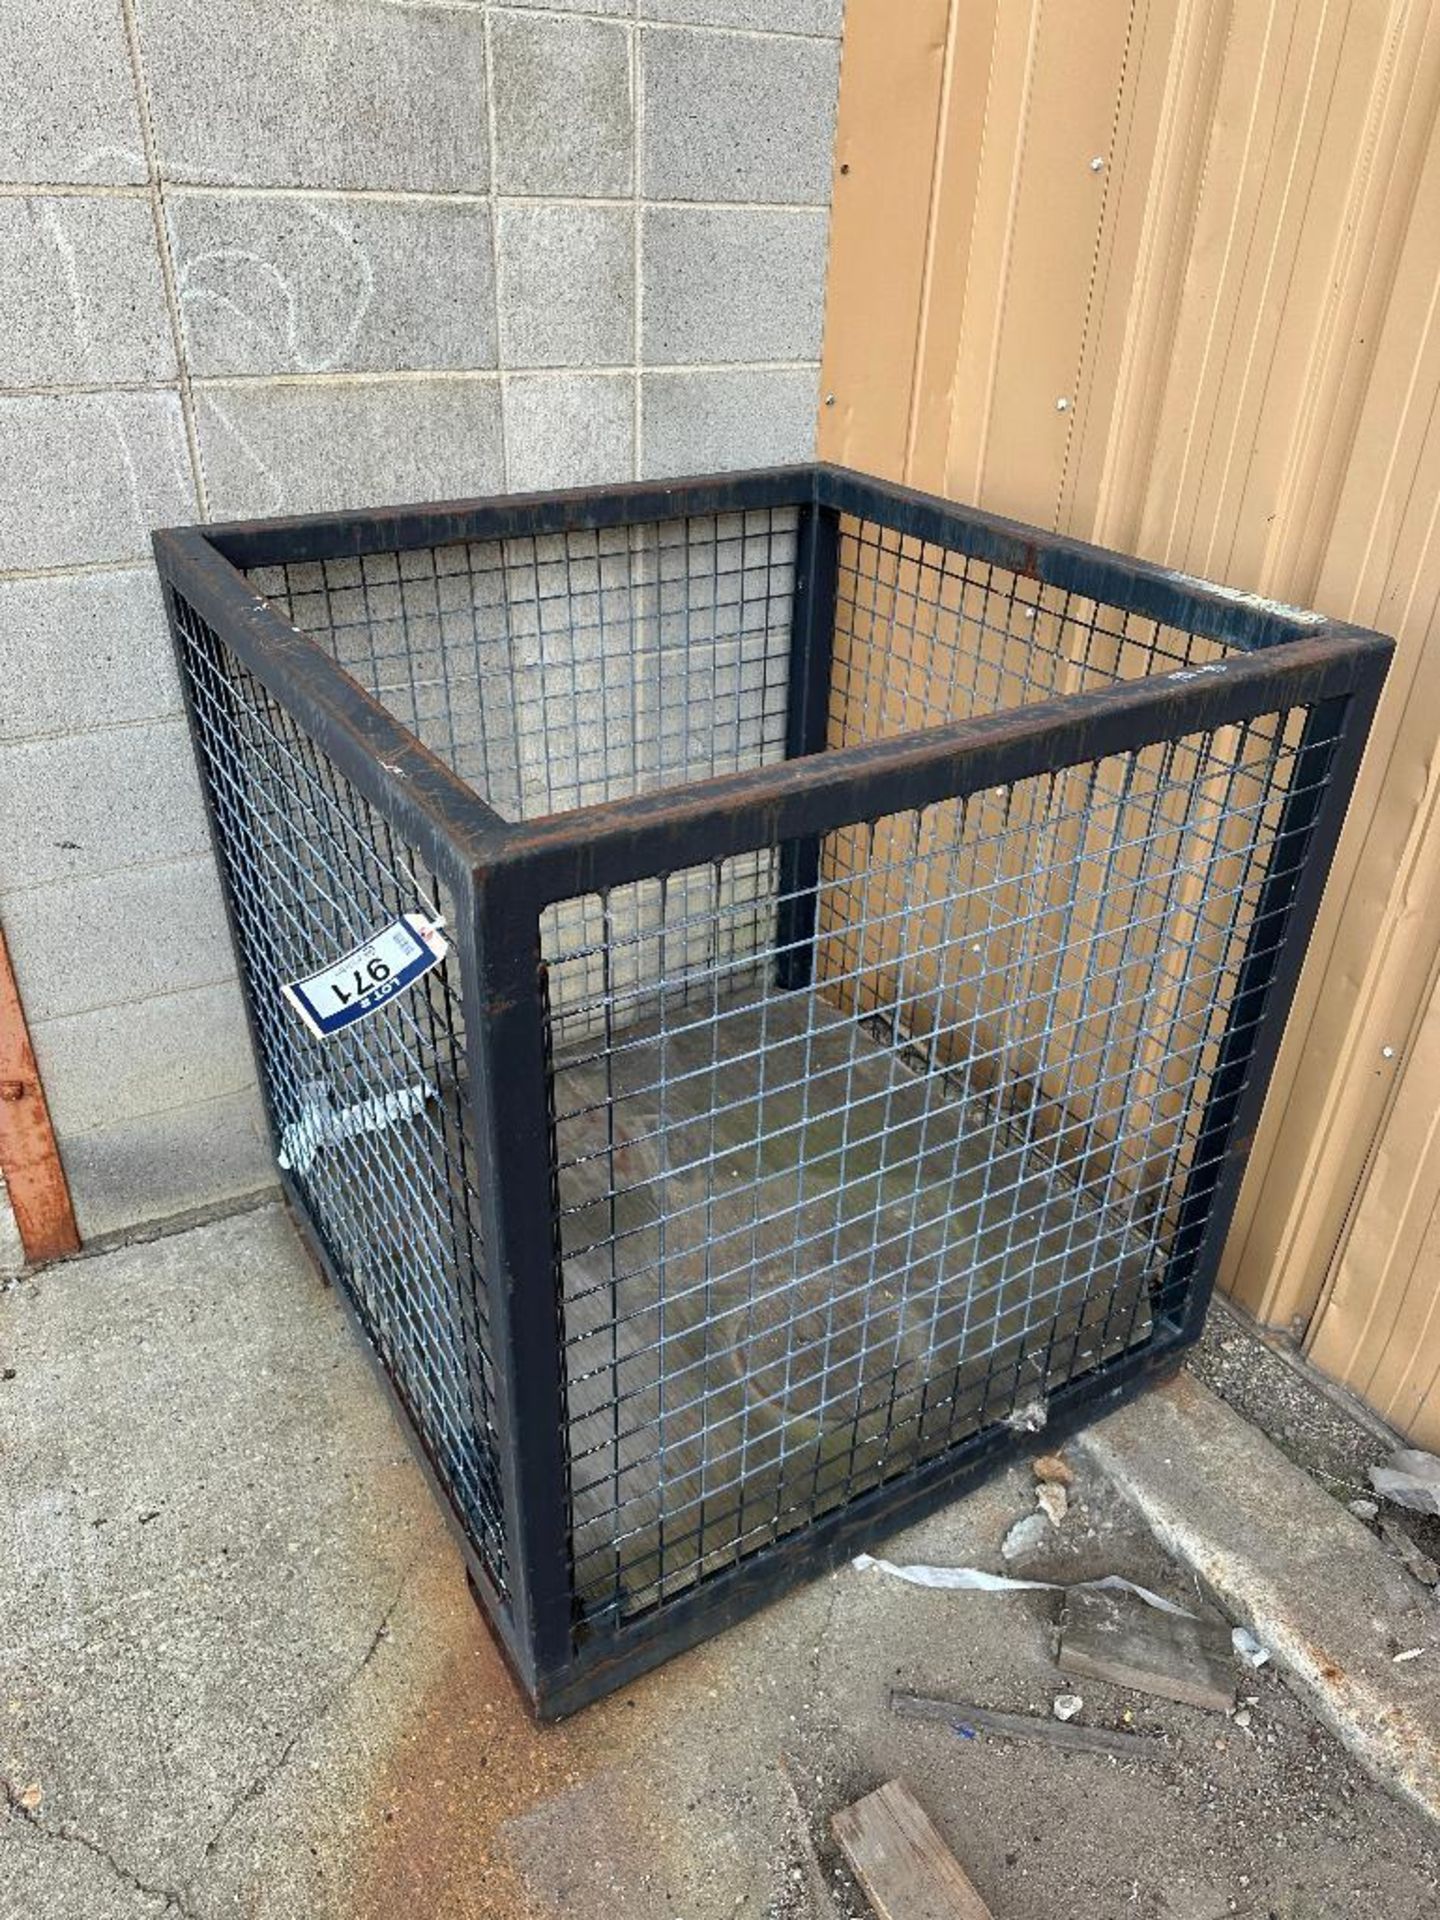 39" X 39" Steel Crate - Image 2 of 3